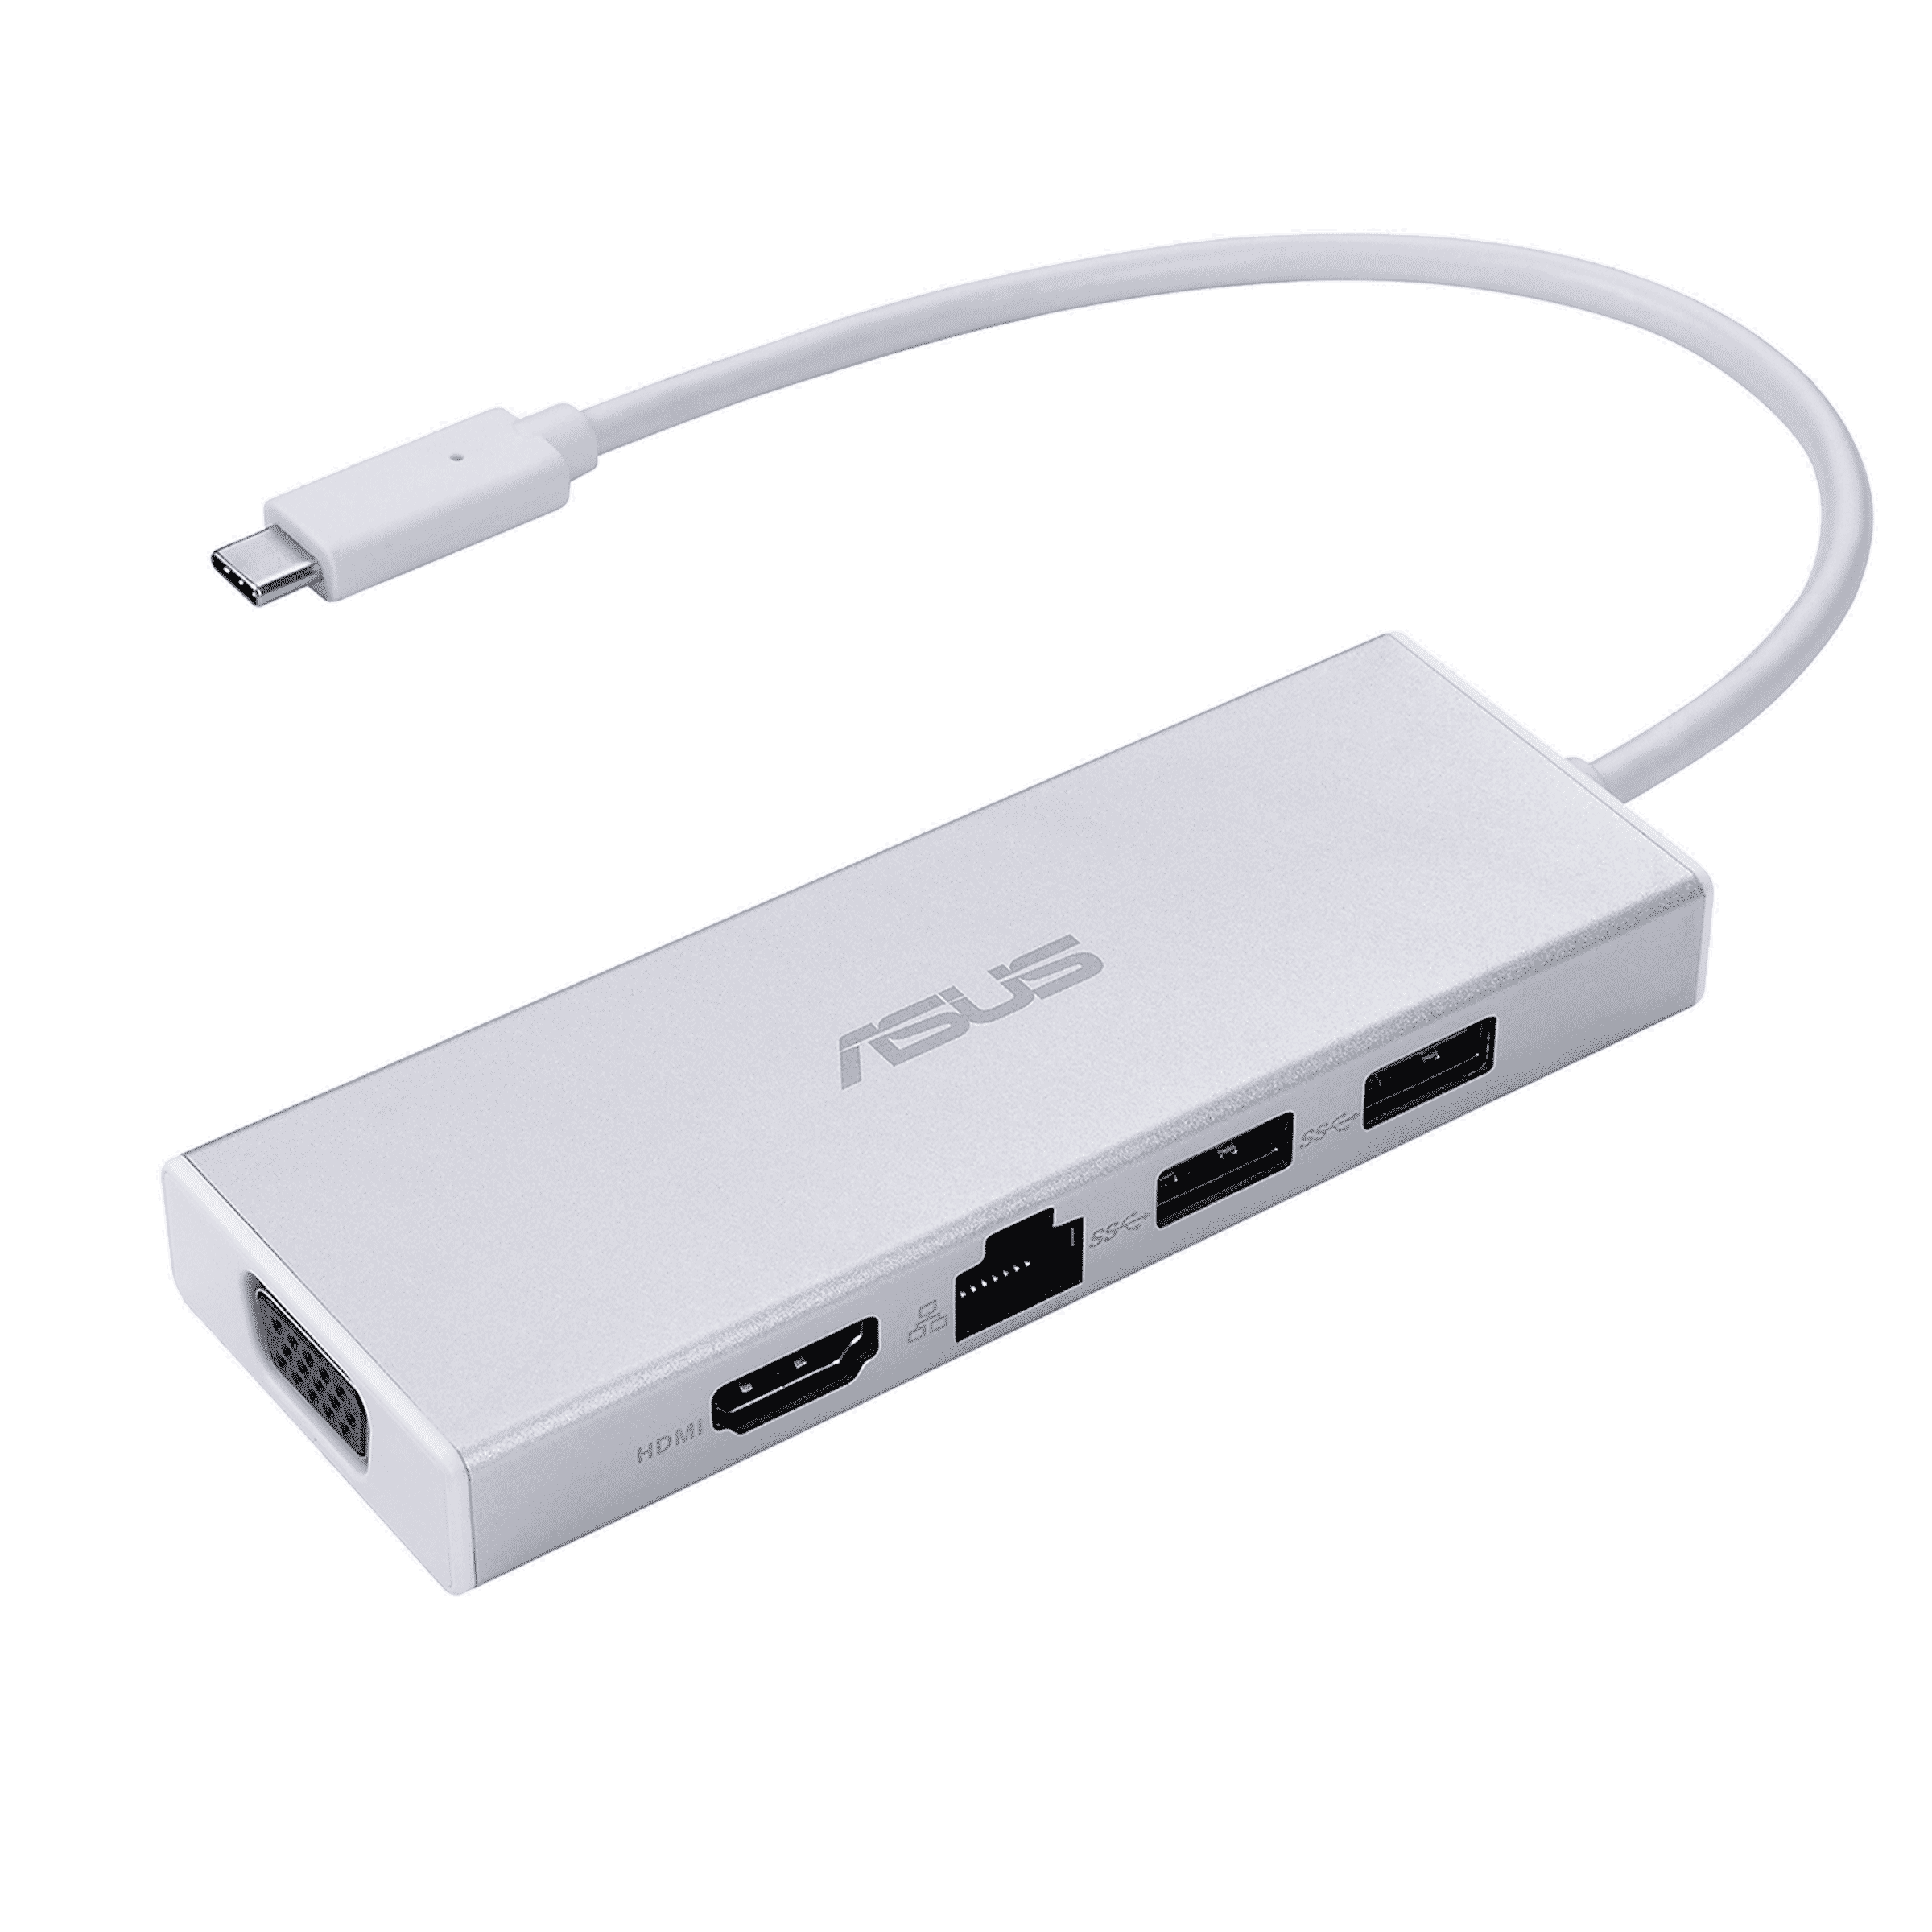 ASUS OS200 USB-C DONGLE